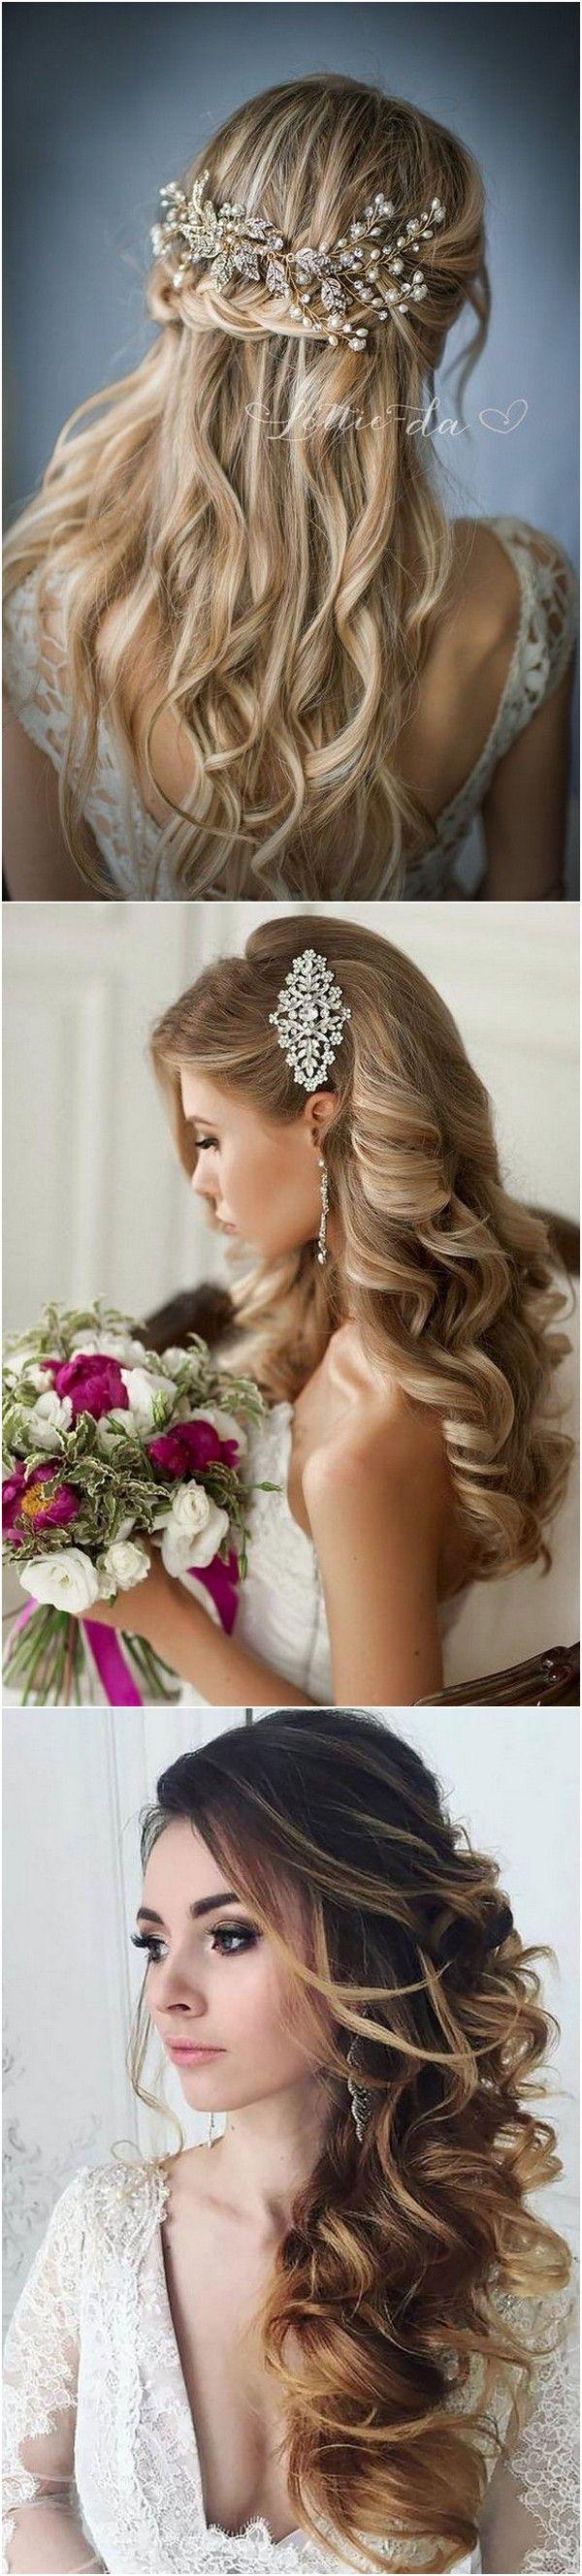 Wedding - Top 20 Vintage Wedding Hairstyles For Brides - Page 3 Of 3